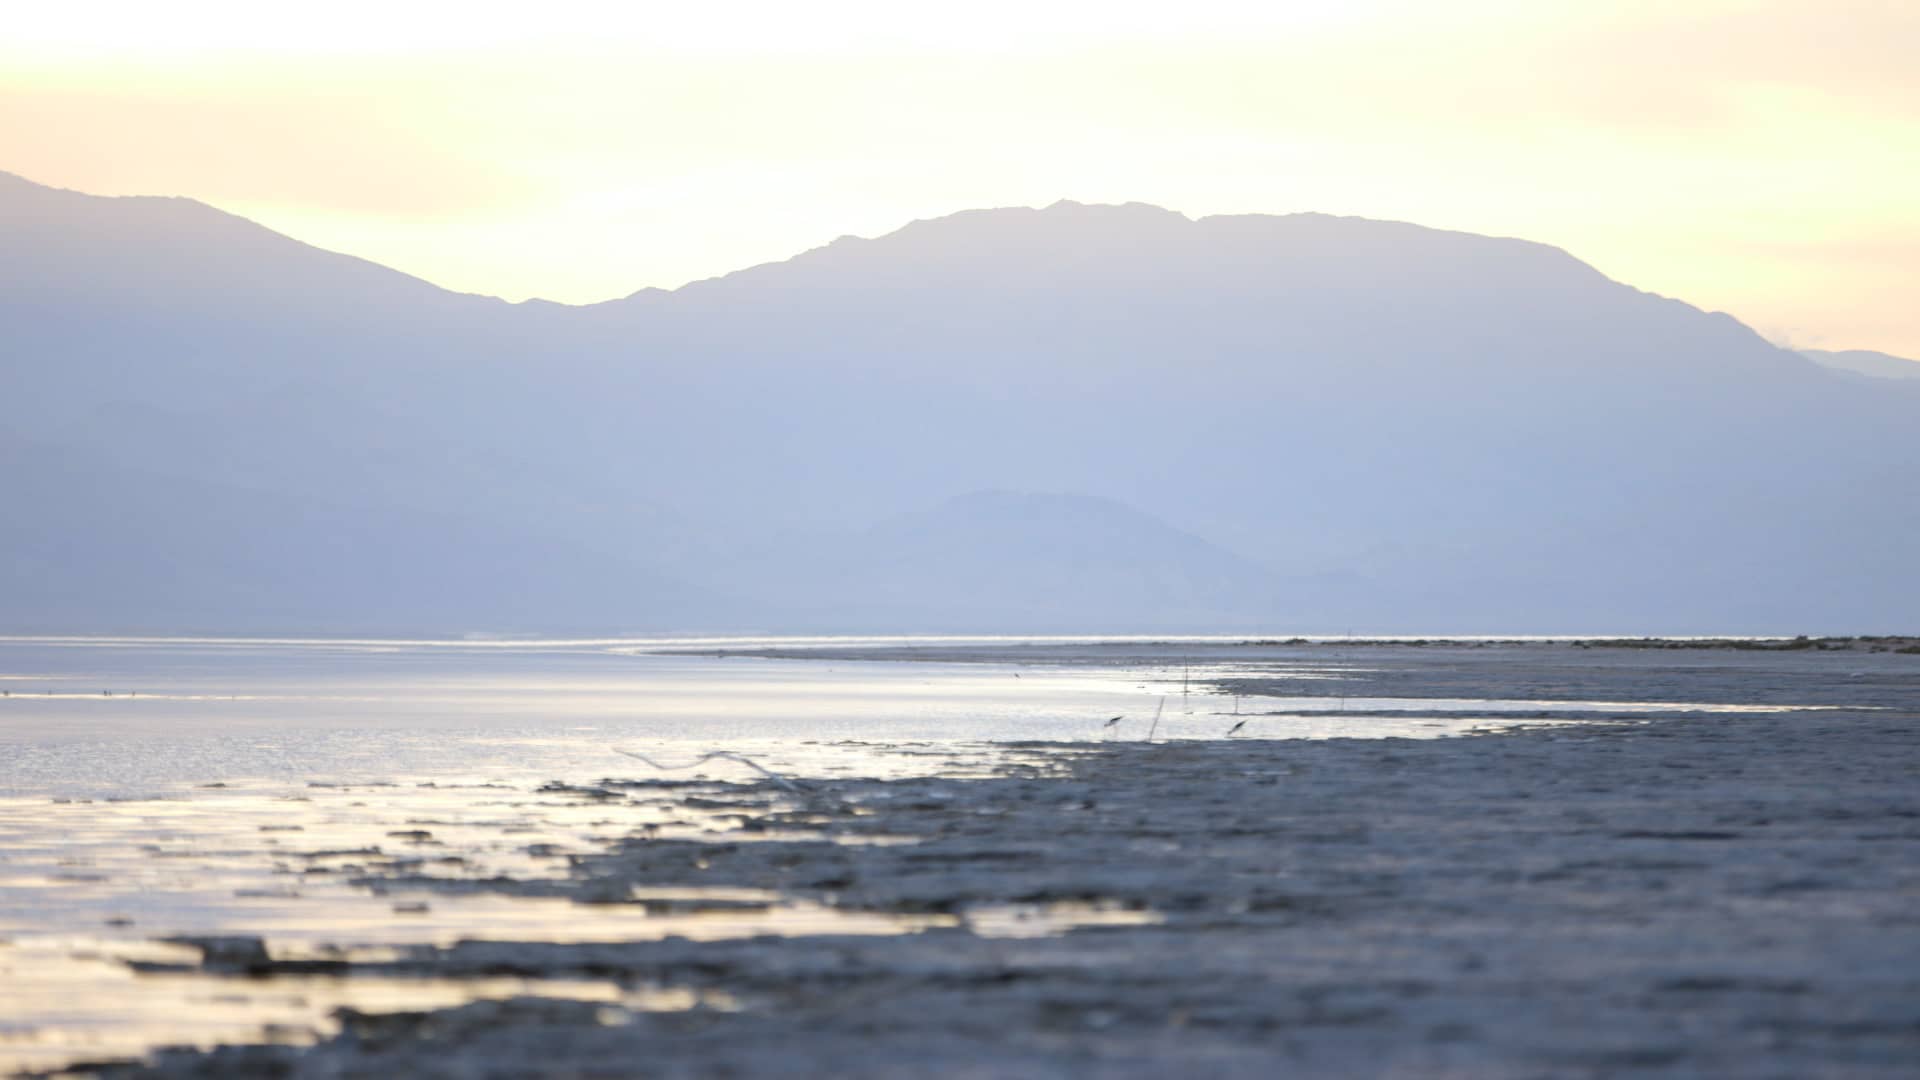 The Salton Sea could produce the world’s greenest lithium, if new extraction technologies work